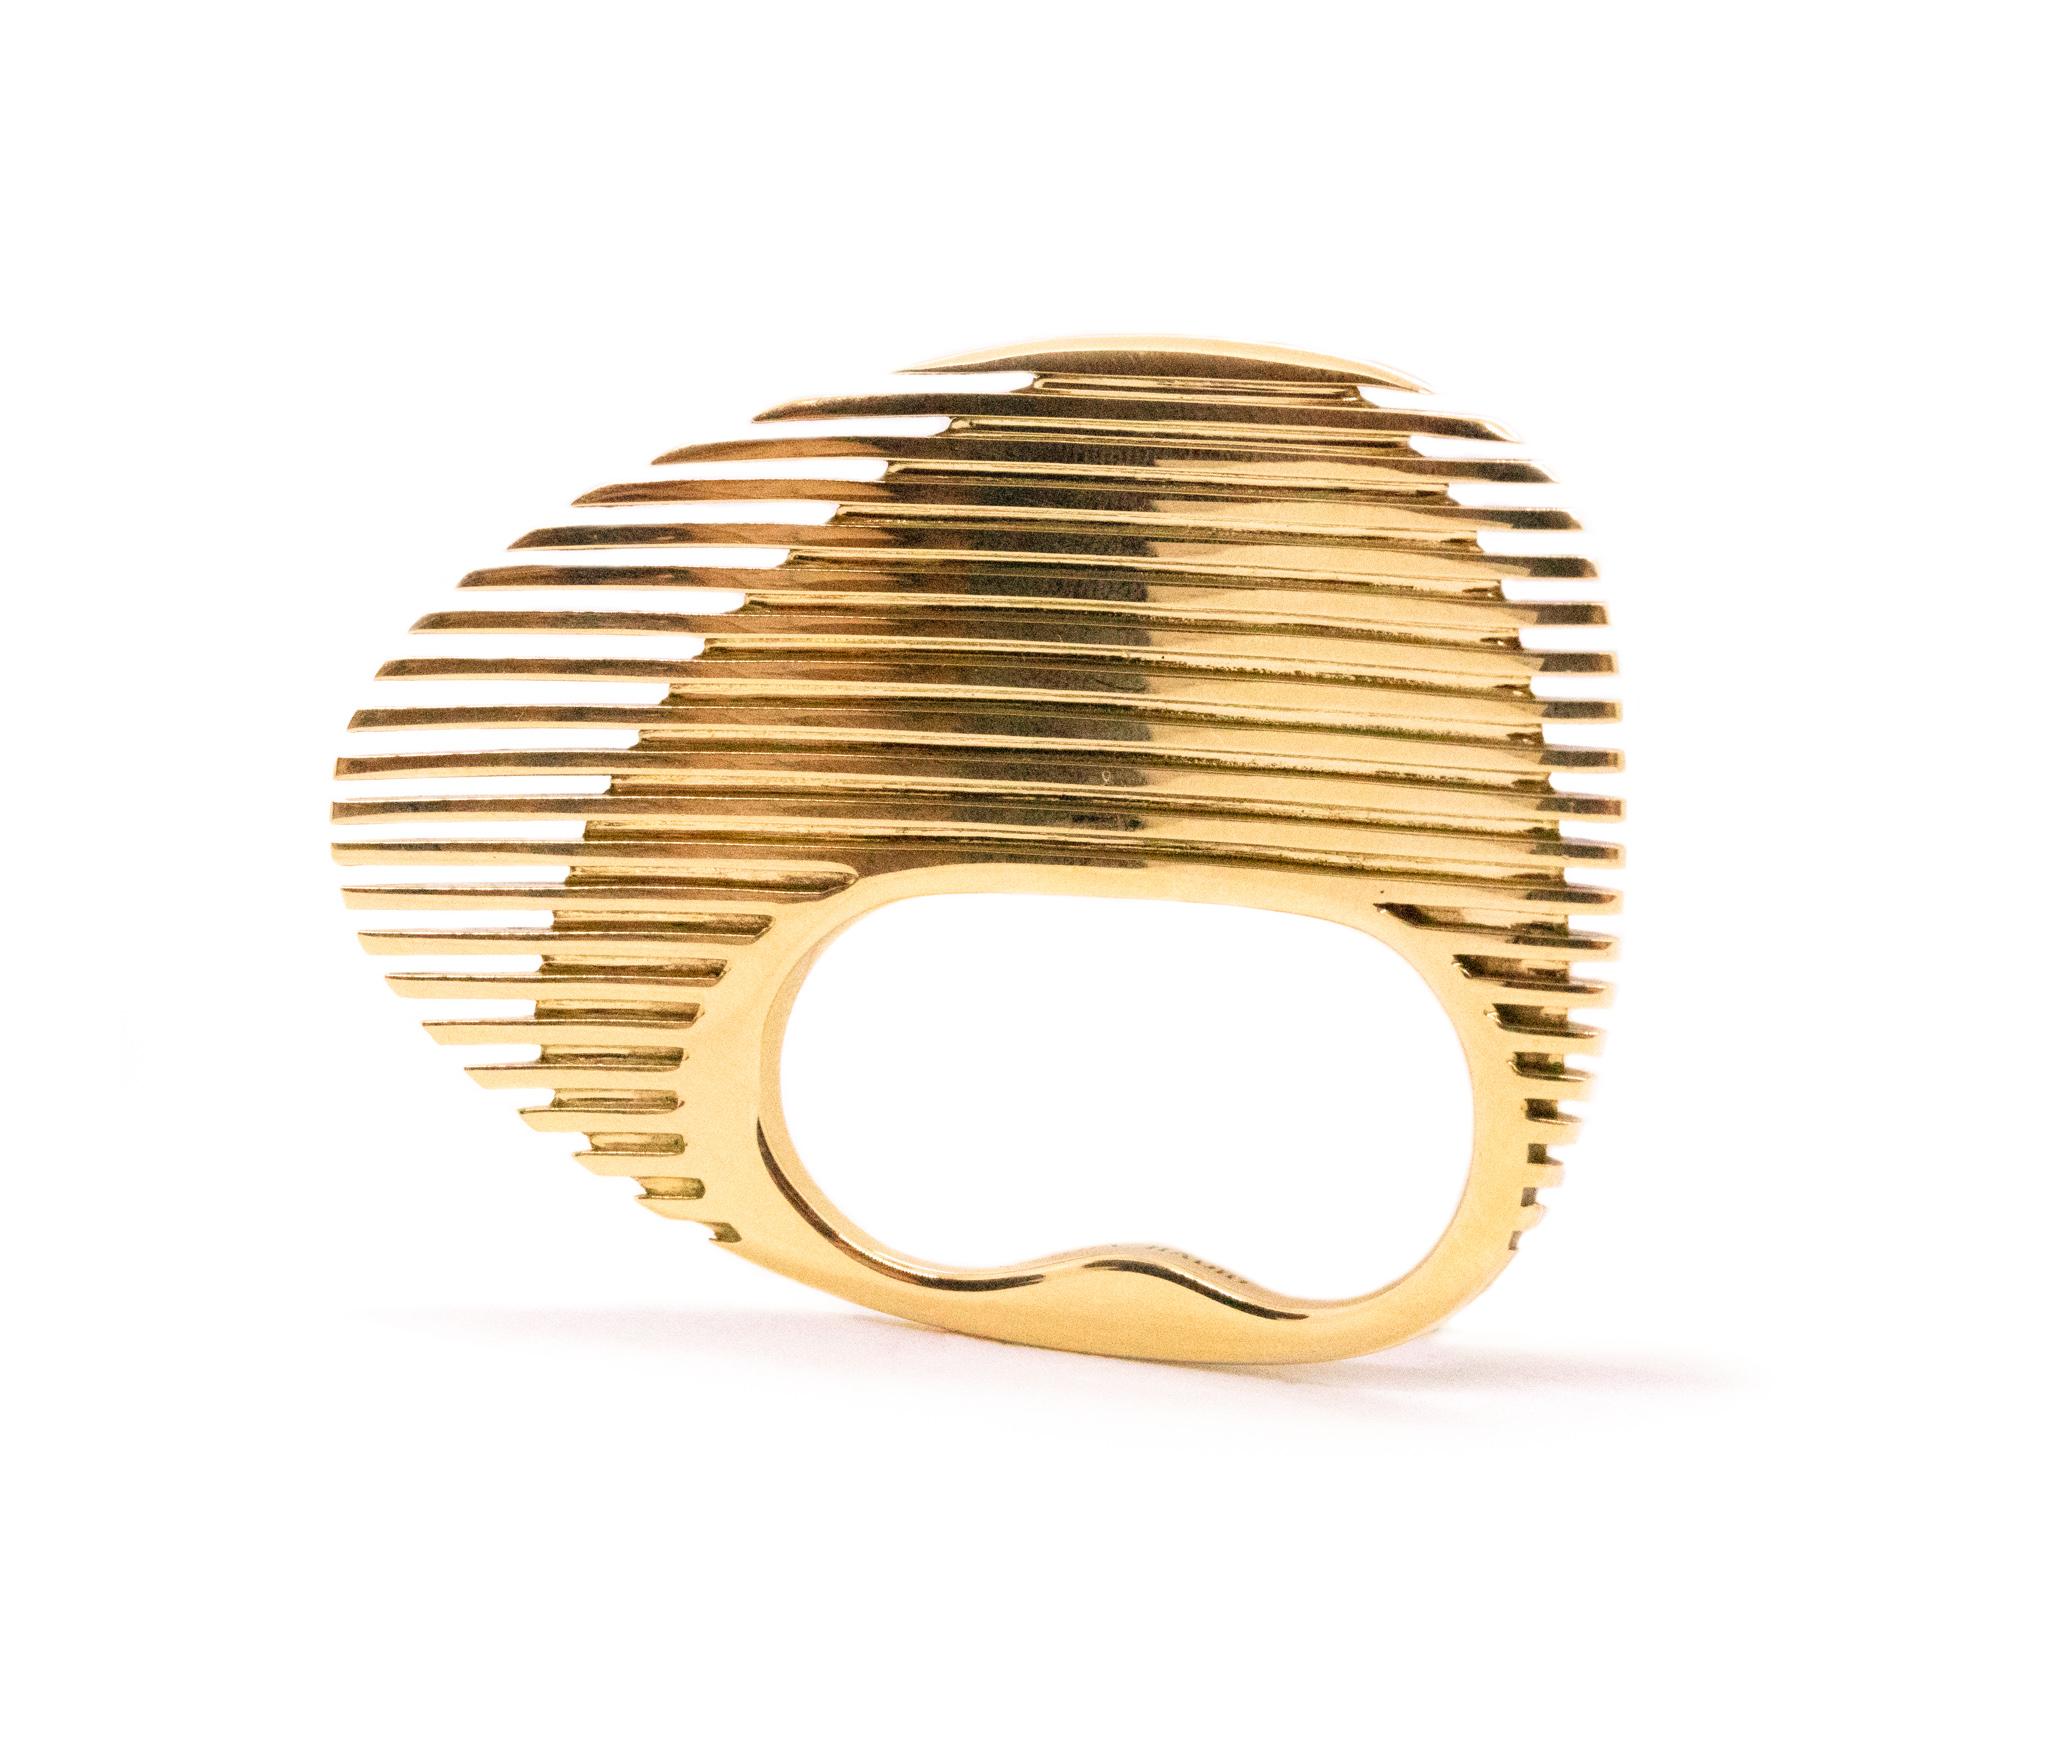 Very rare ring designed by Zaha Hadid (1950-2016) for Georg Jensen.

This sculptural double fingers ring is part of the Lamellae collection, created exclusively for Georg Jensen by the famed Iraqi-born British architect Zaha Hadid. This sculptural,